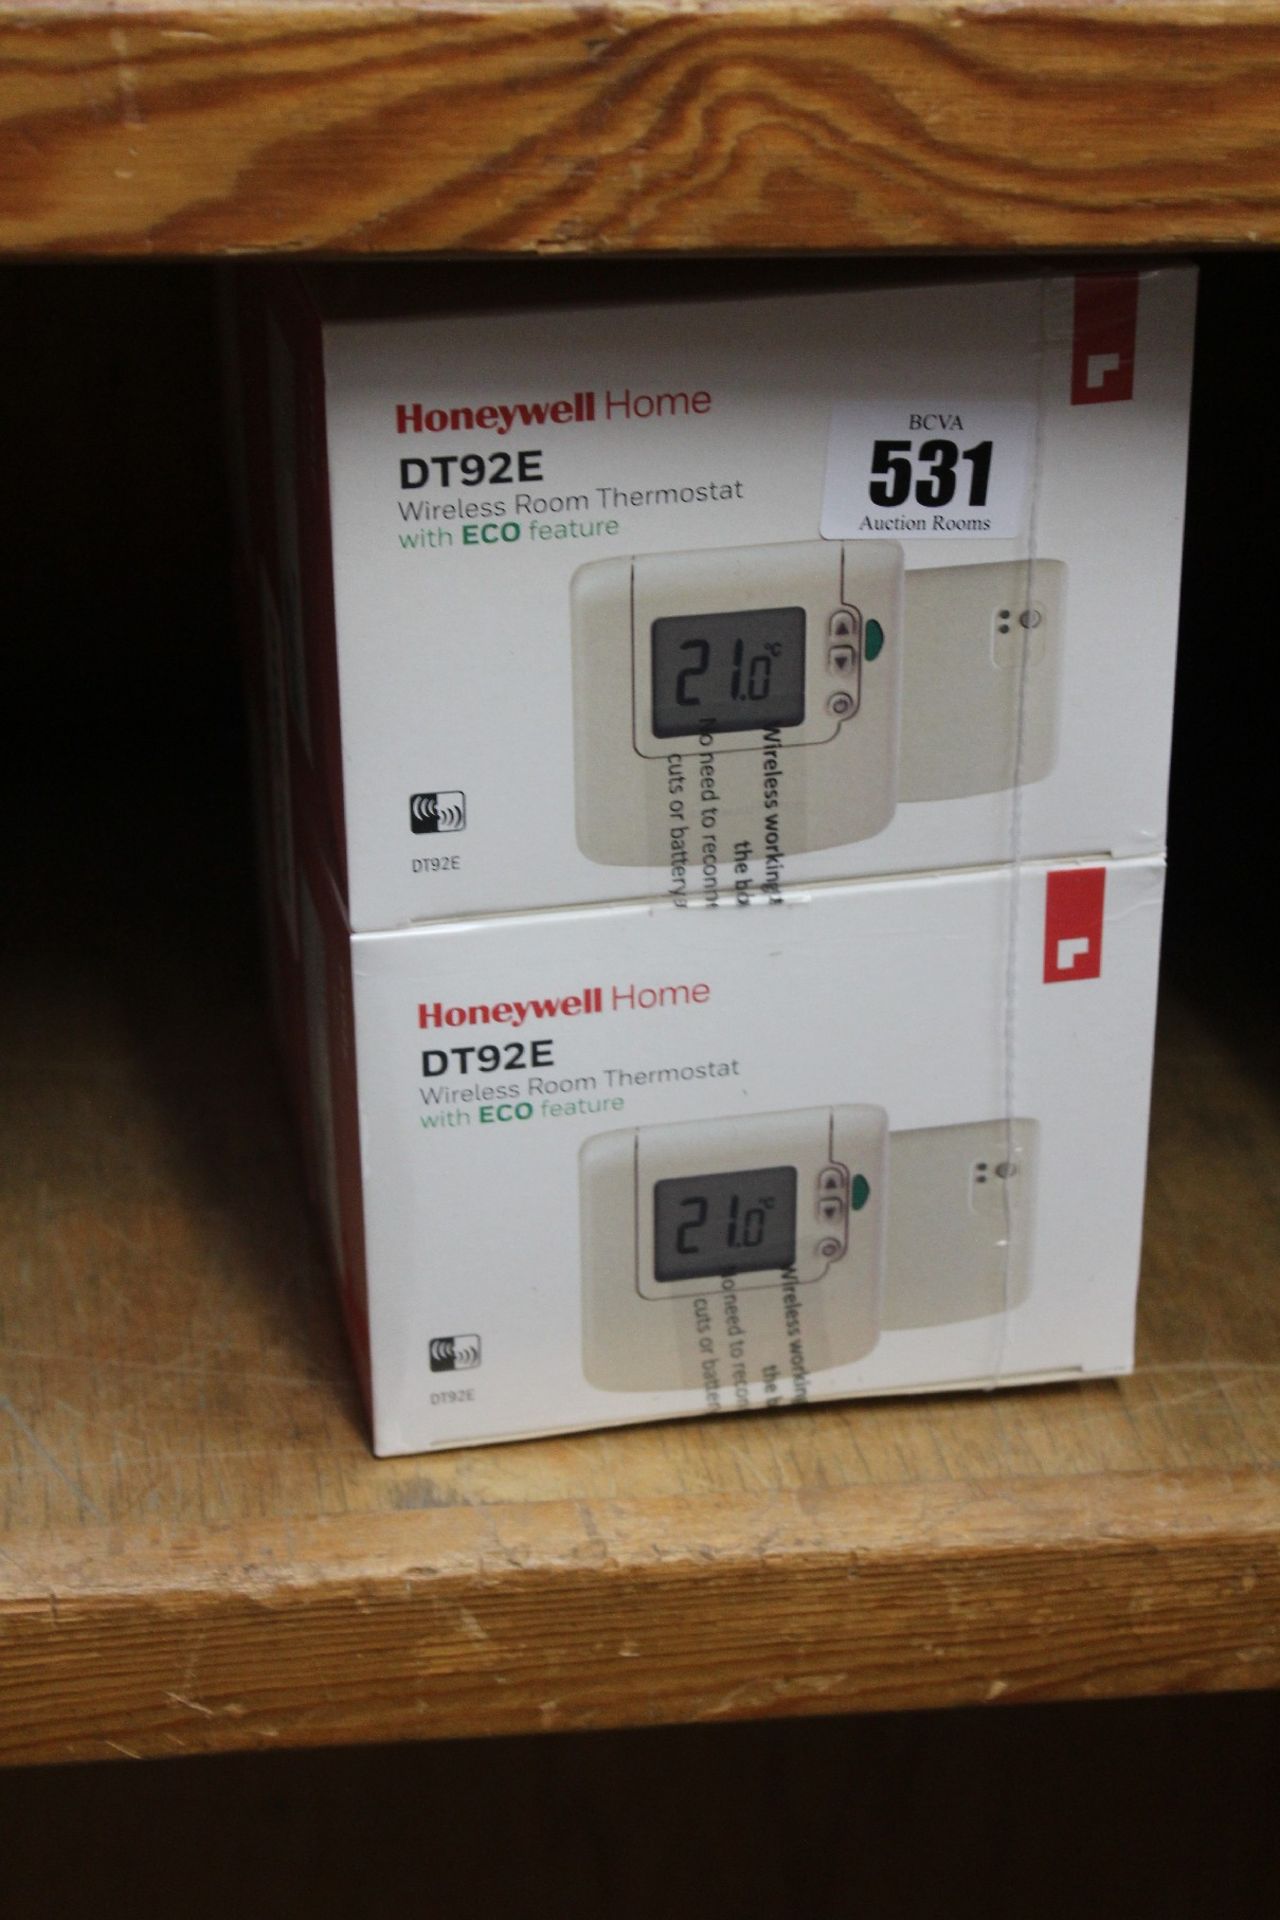 Four as new HoneyWell Home DT92E wireless room thermostats with eco feature.